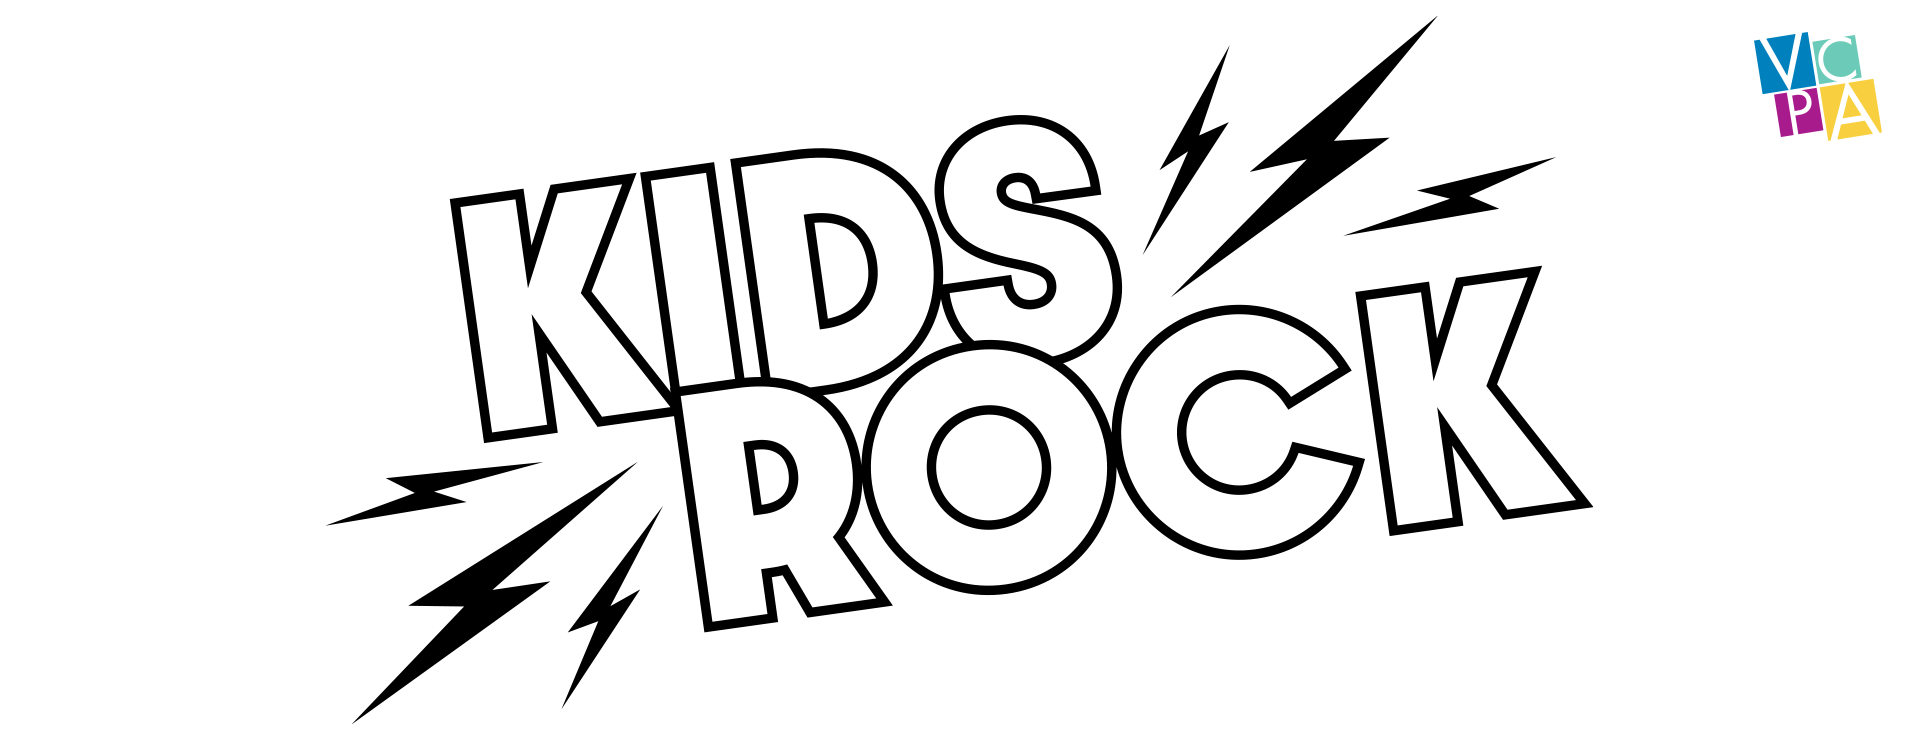 Kids Rock at VCPA, Rock Bands for Kids 4-6